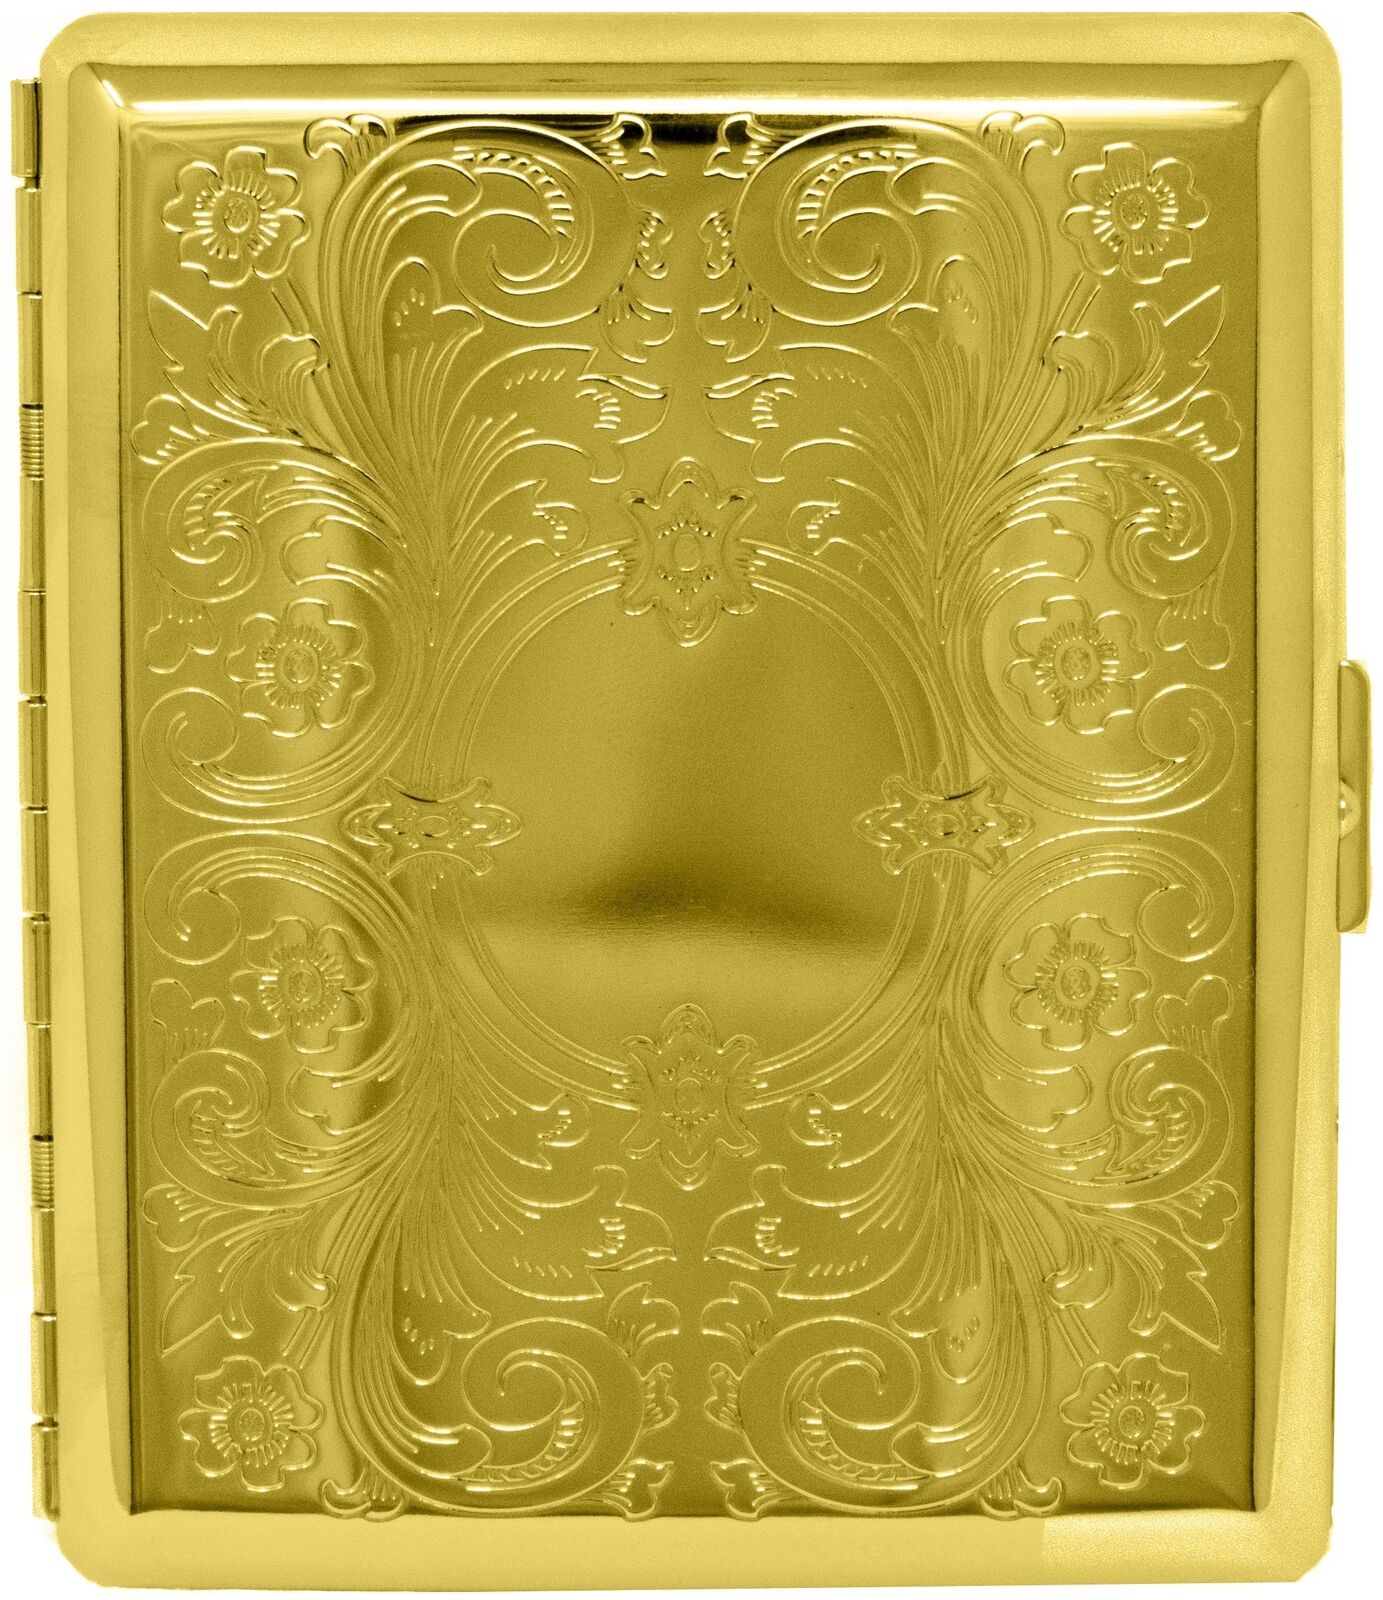 Gold Vintage Victorian Scroll (Full Pack 100s) Metal-Plated Cigarette Case